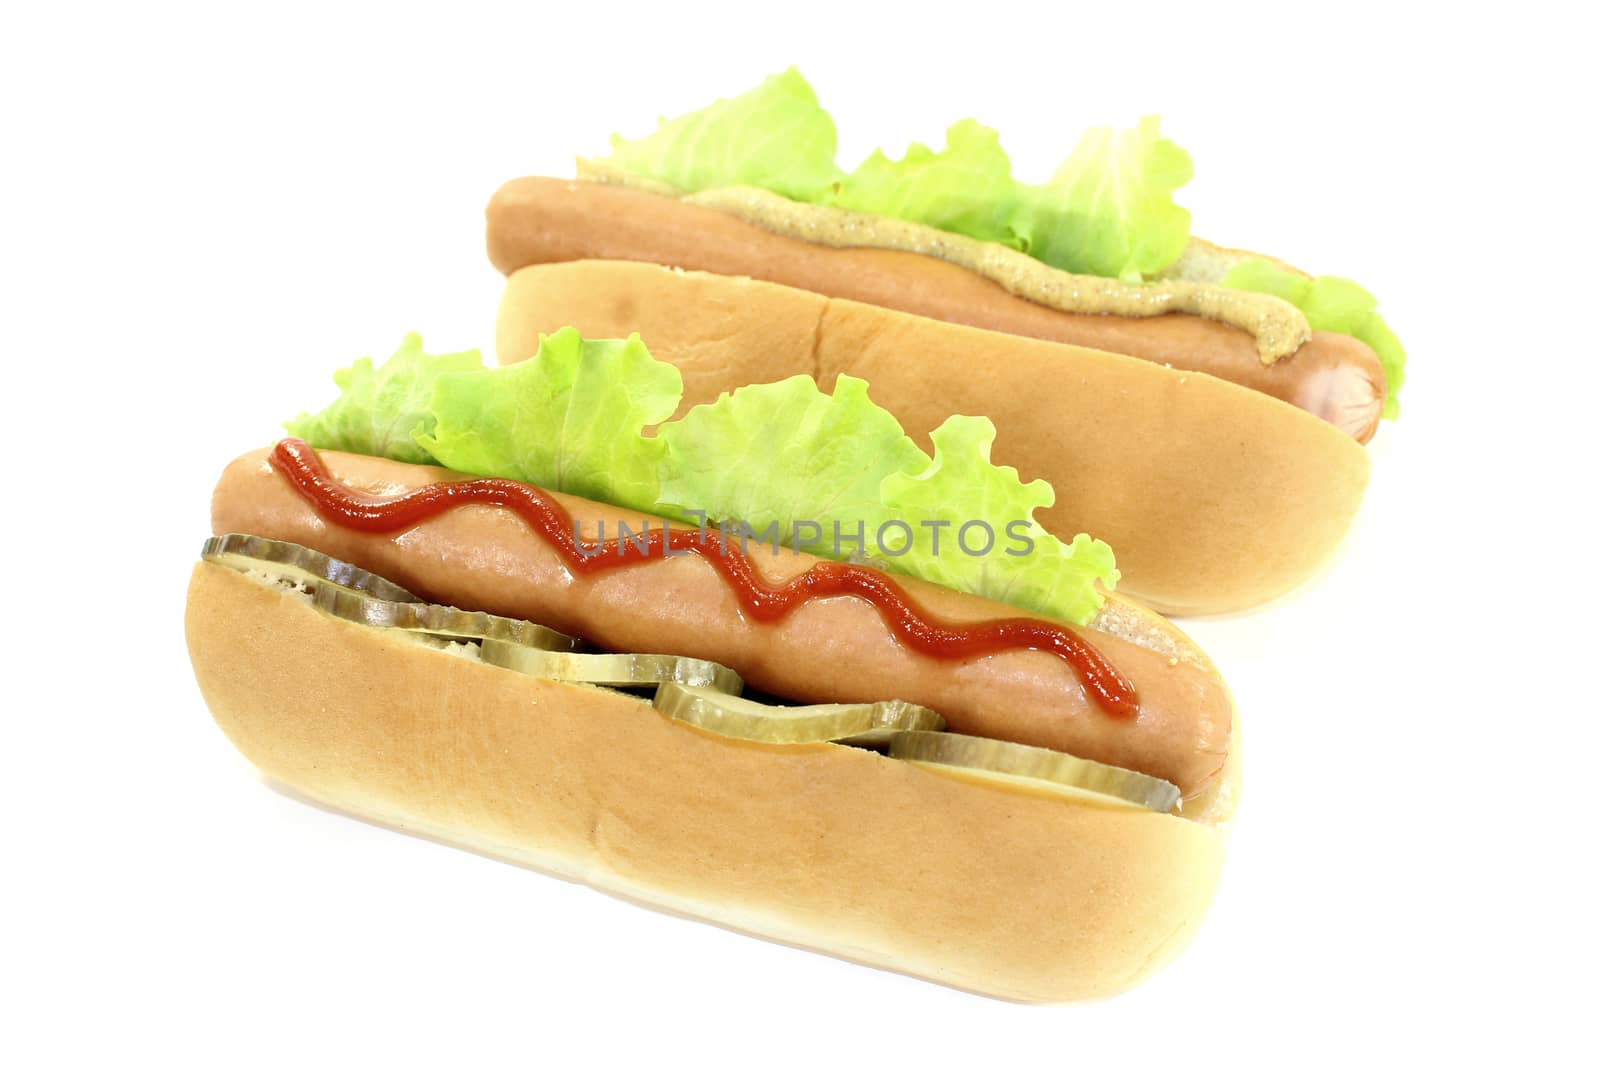 Hot dog with pickle, lettuce leaf, sausage, mustard and ketchup